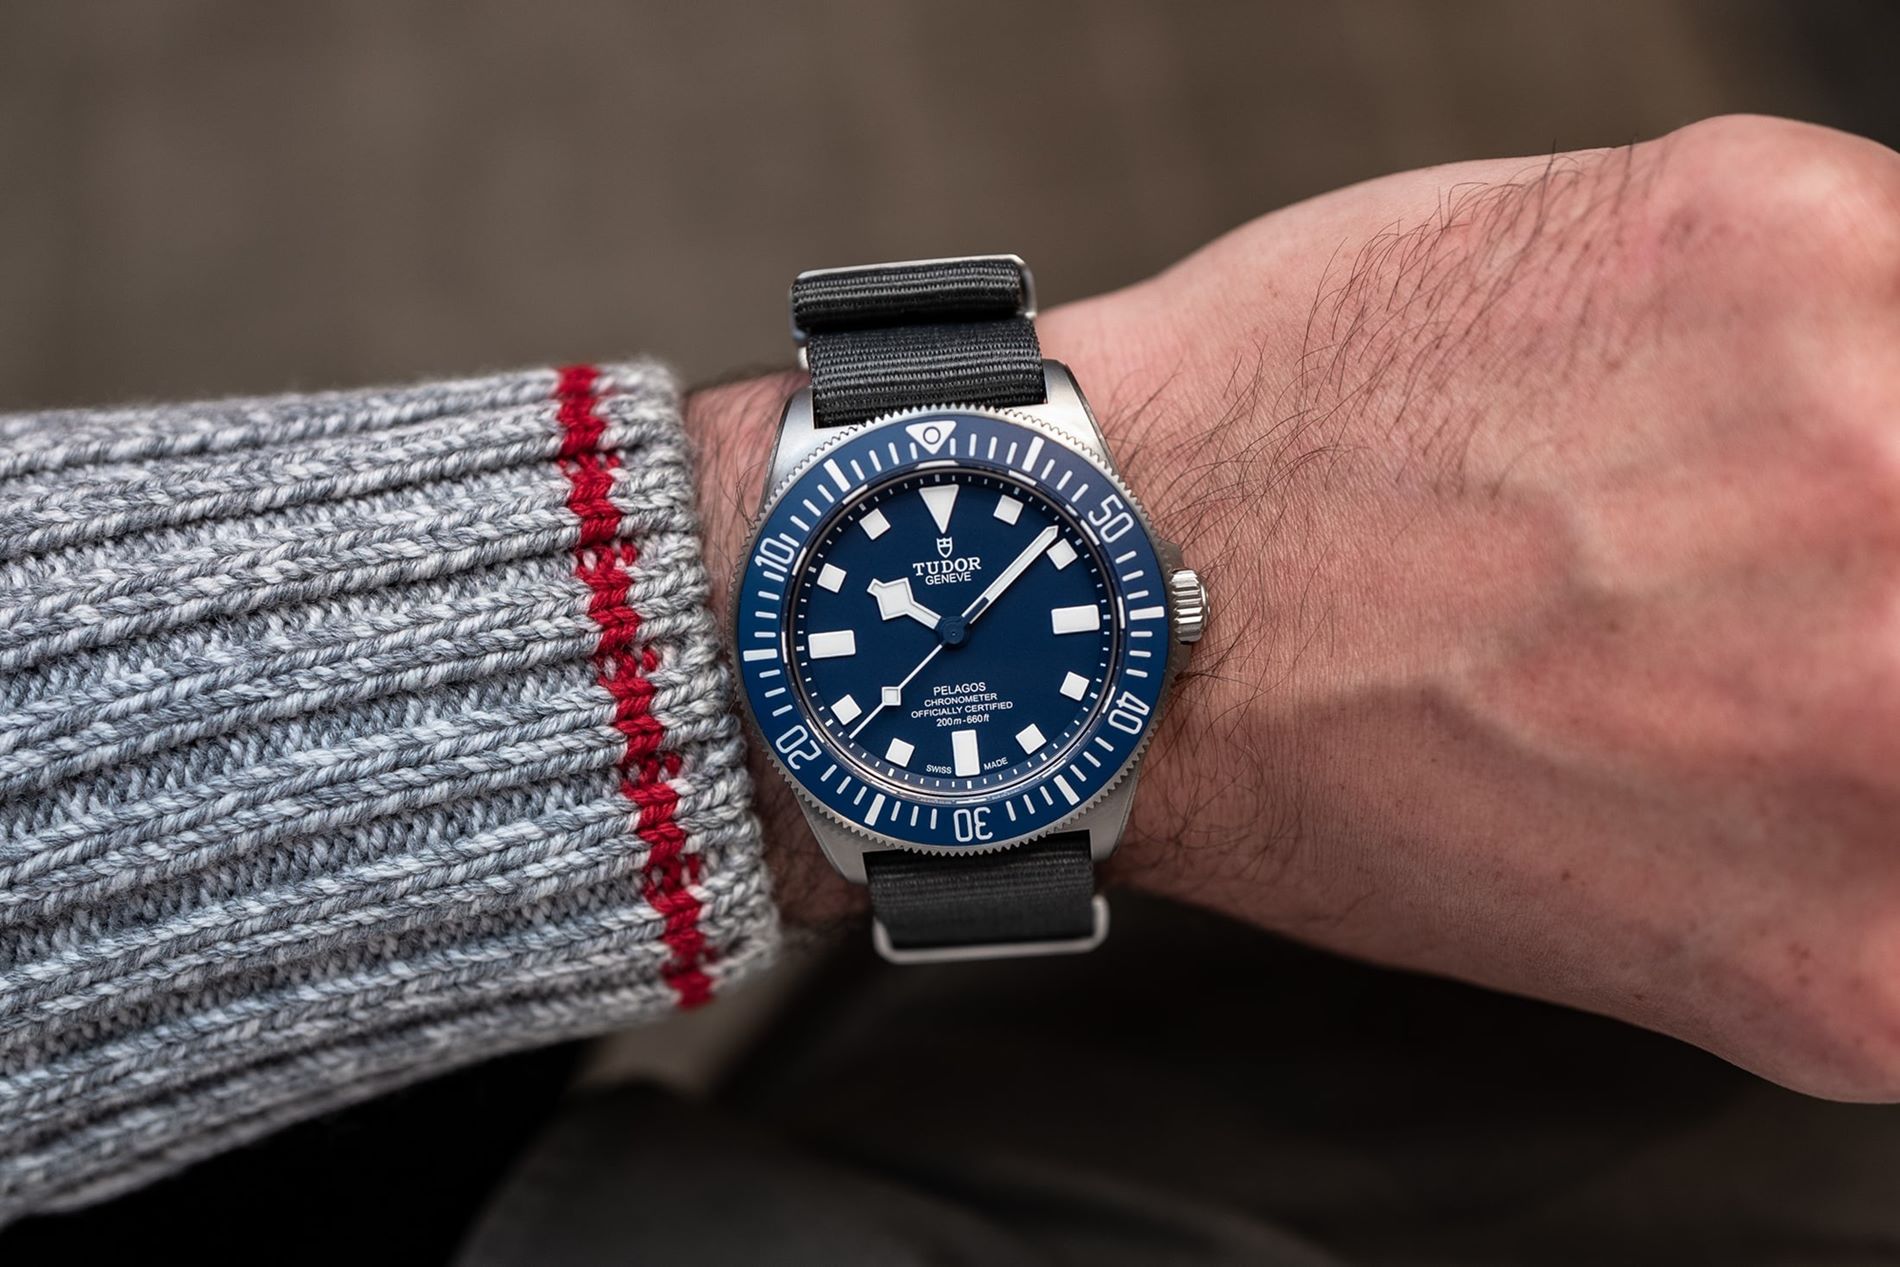 How To Use The Bezel On A Dive Watch